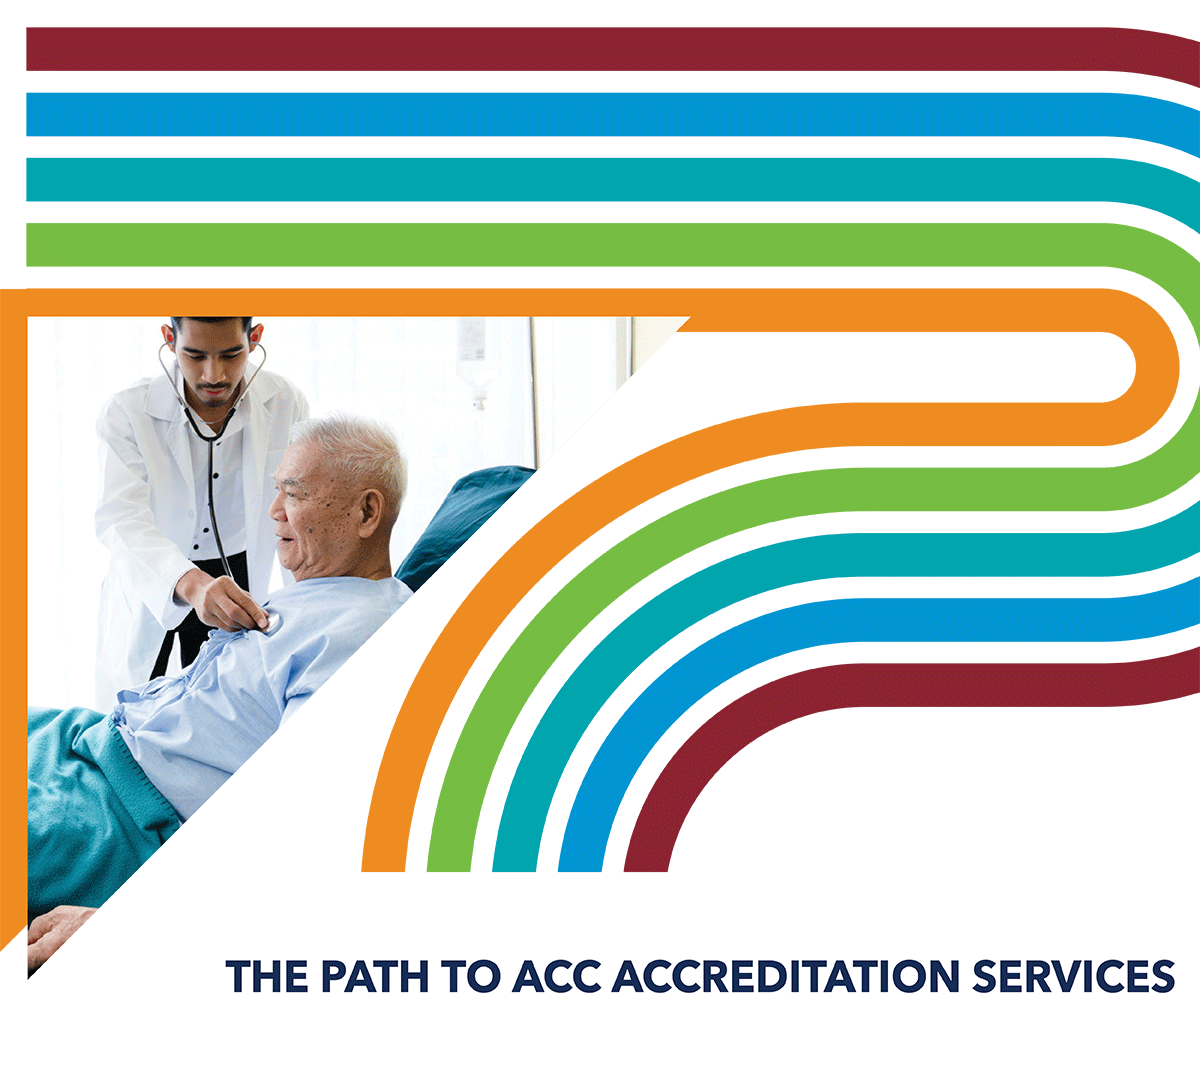 The Path to ACC Accreditation Services